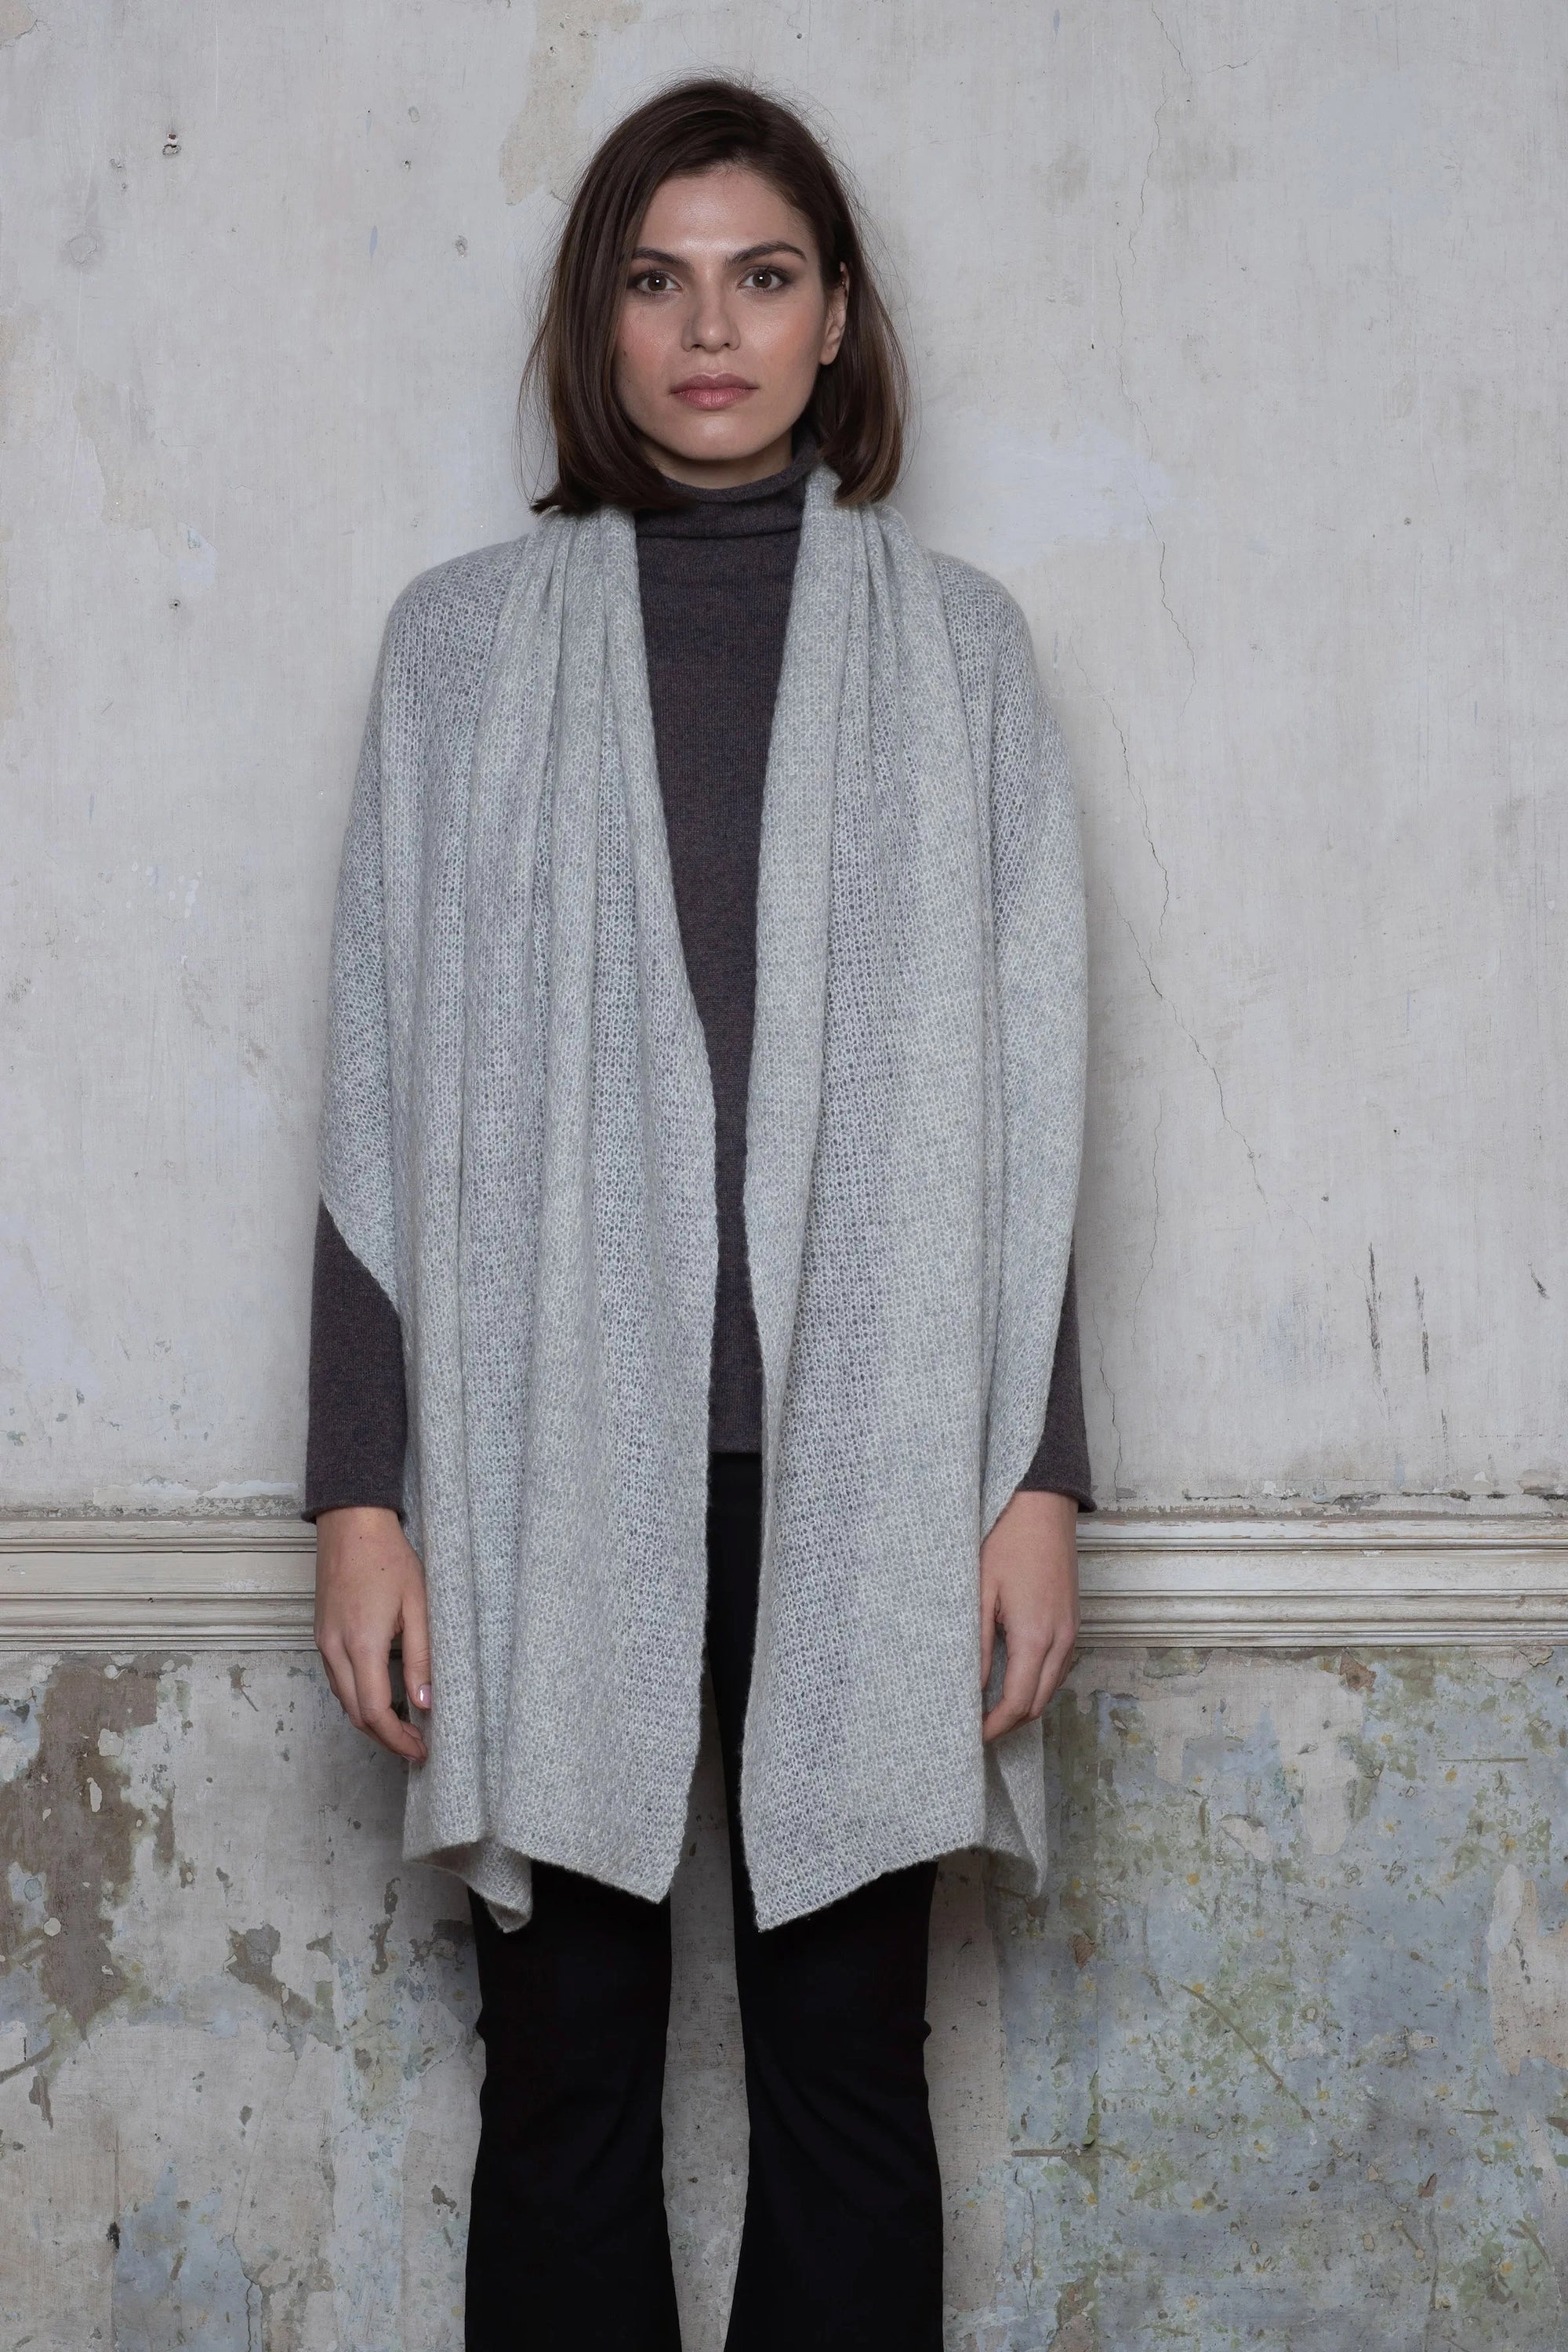 Large Cashmere Wrap Scarf in Grey